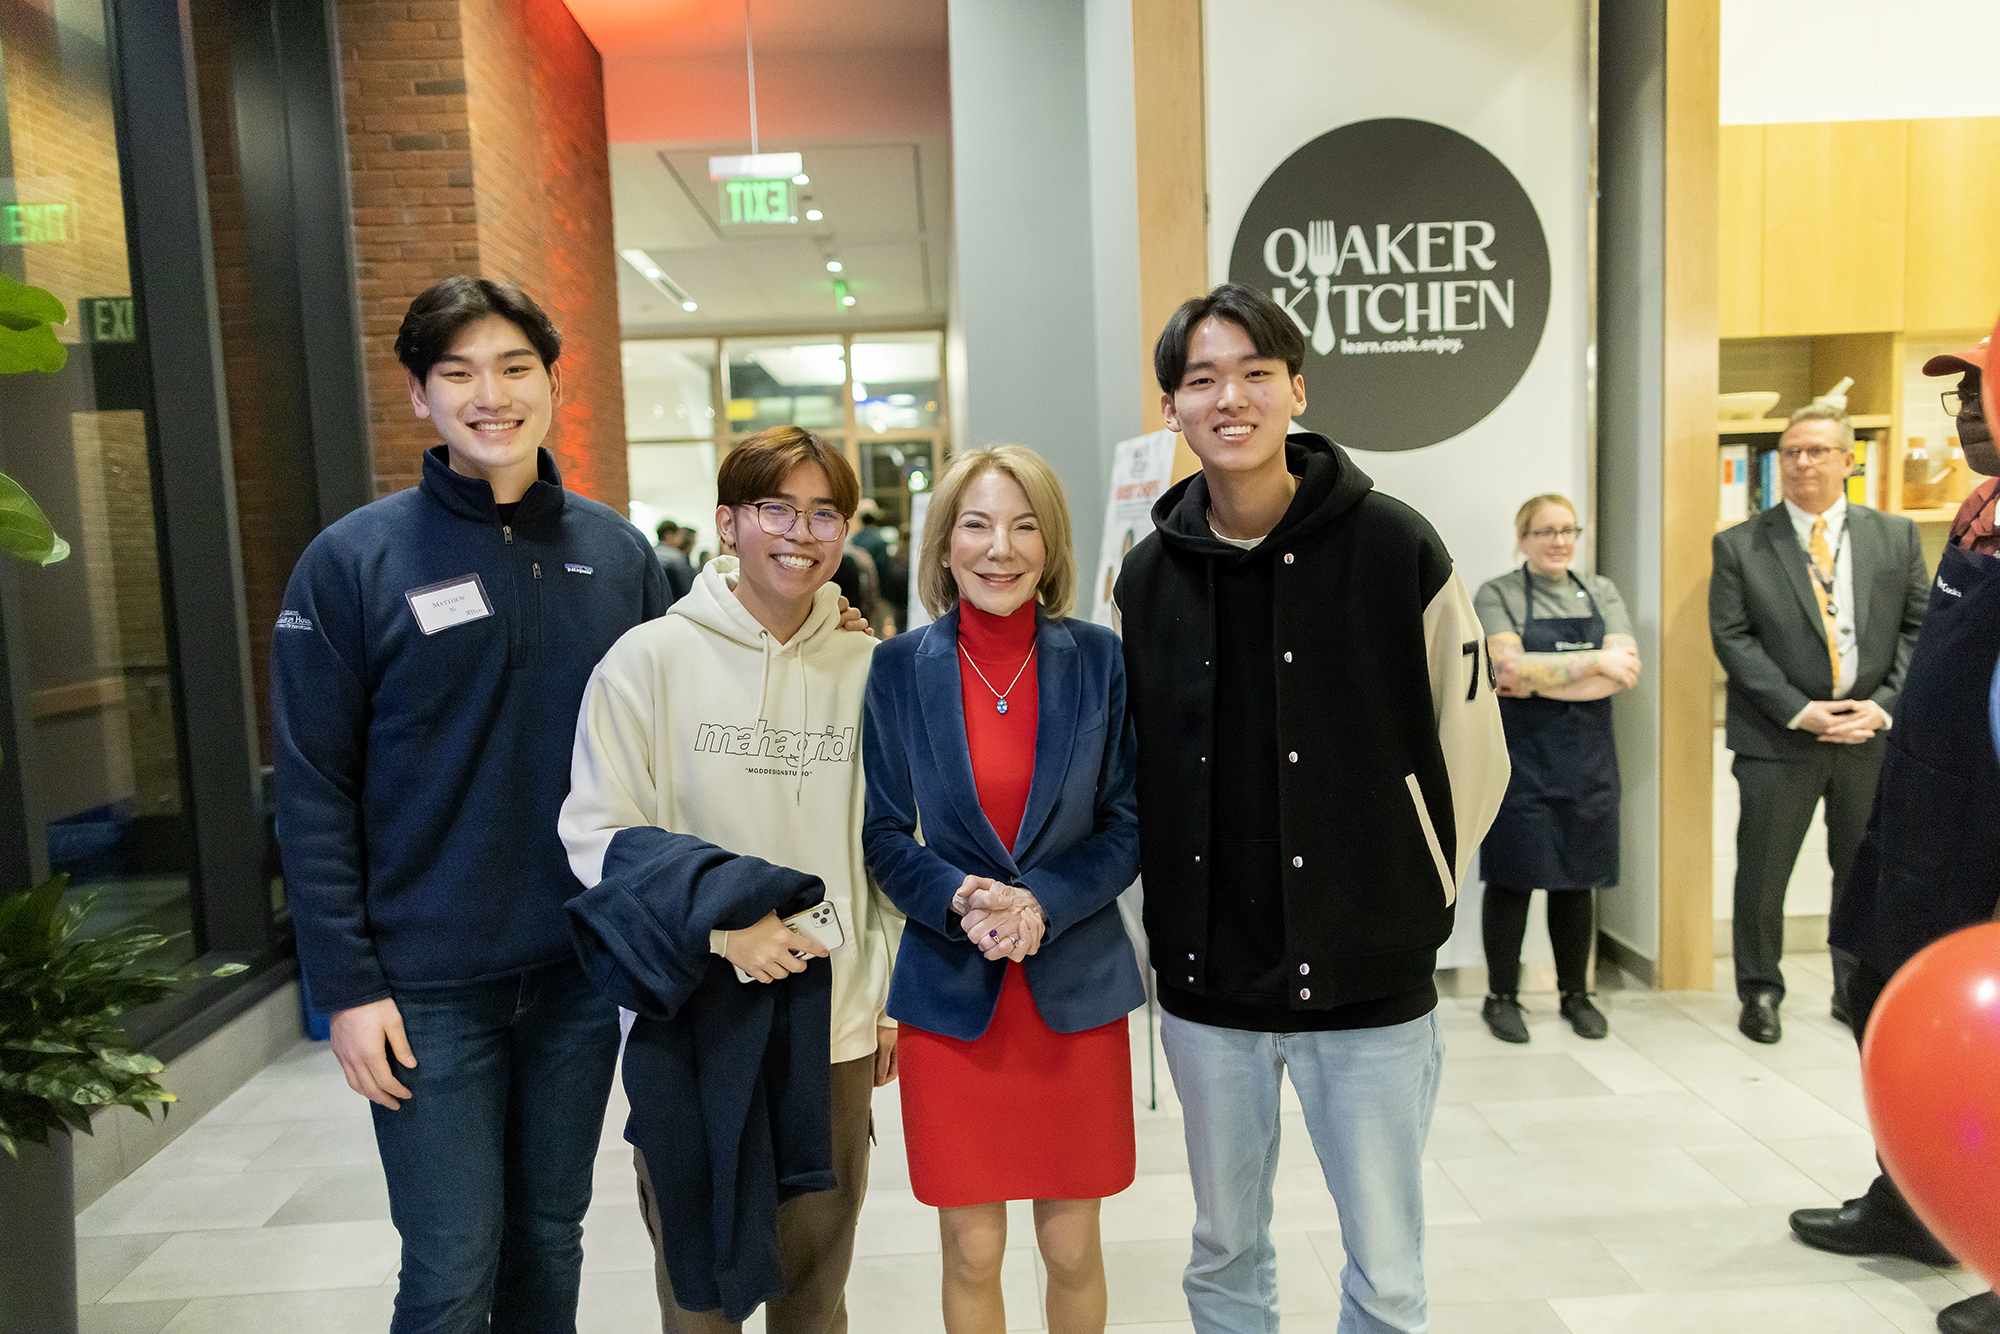 Gutmann with students in front of Quaker Kitchen